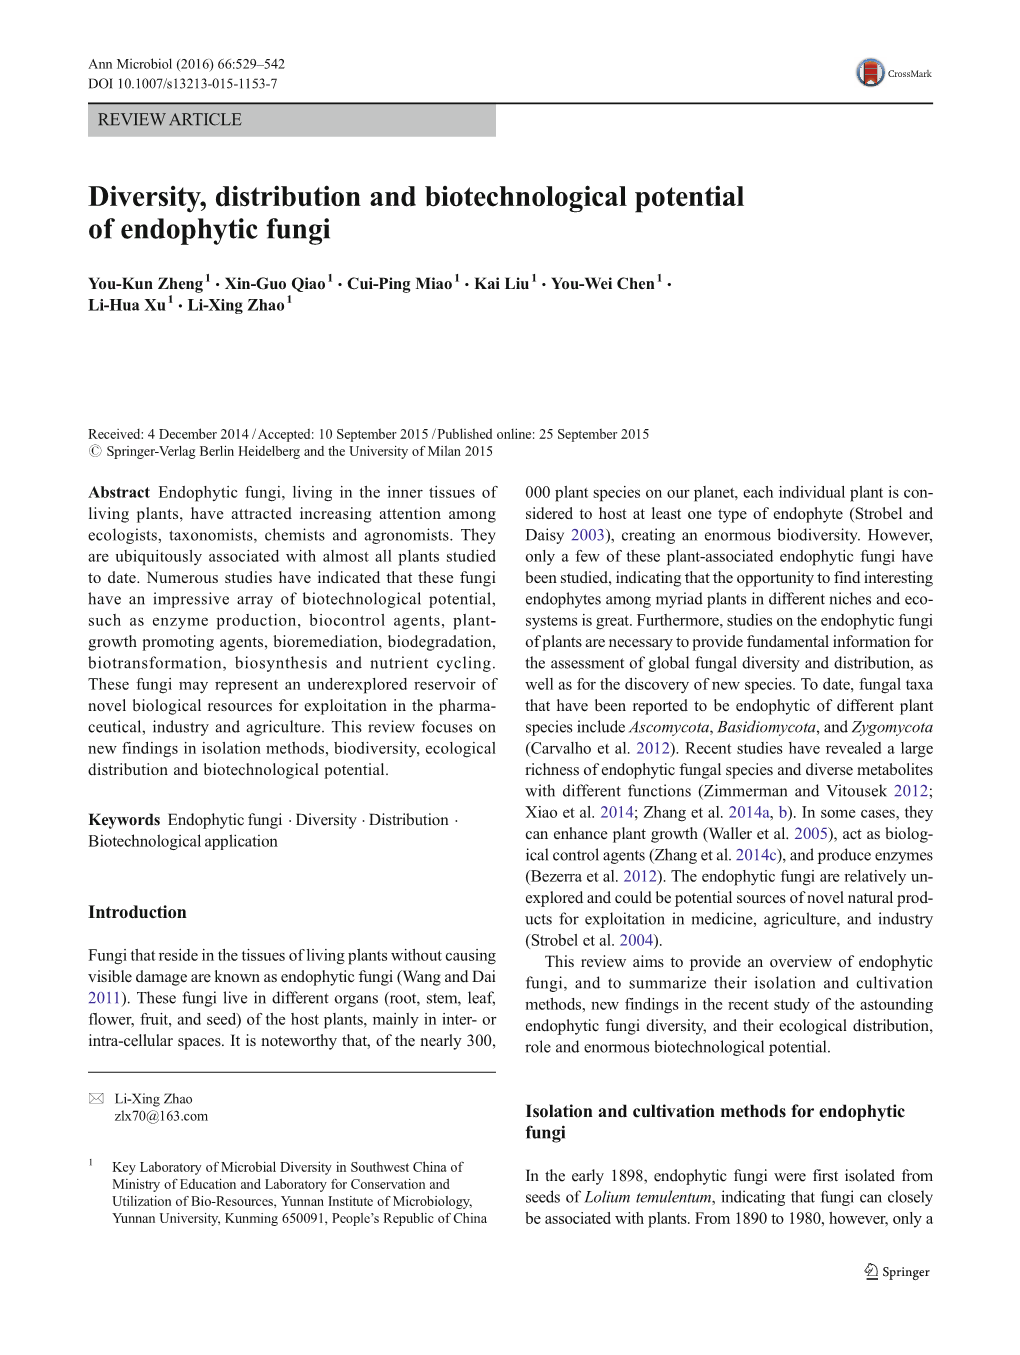 Diversity, Distribution and Biotechnological Potential of Endophytic Fungi